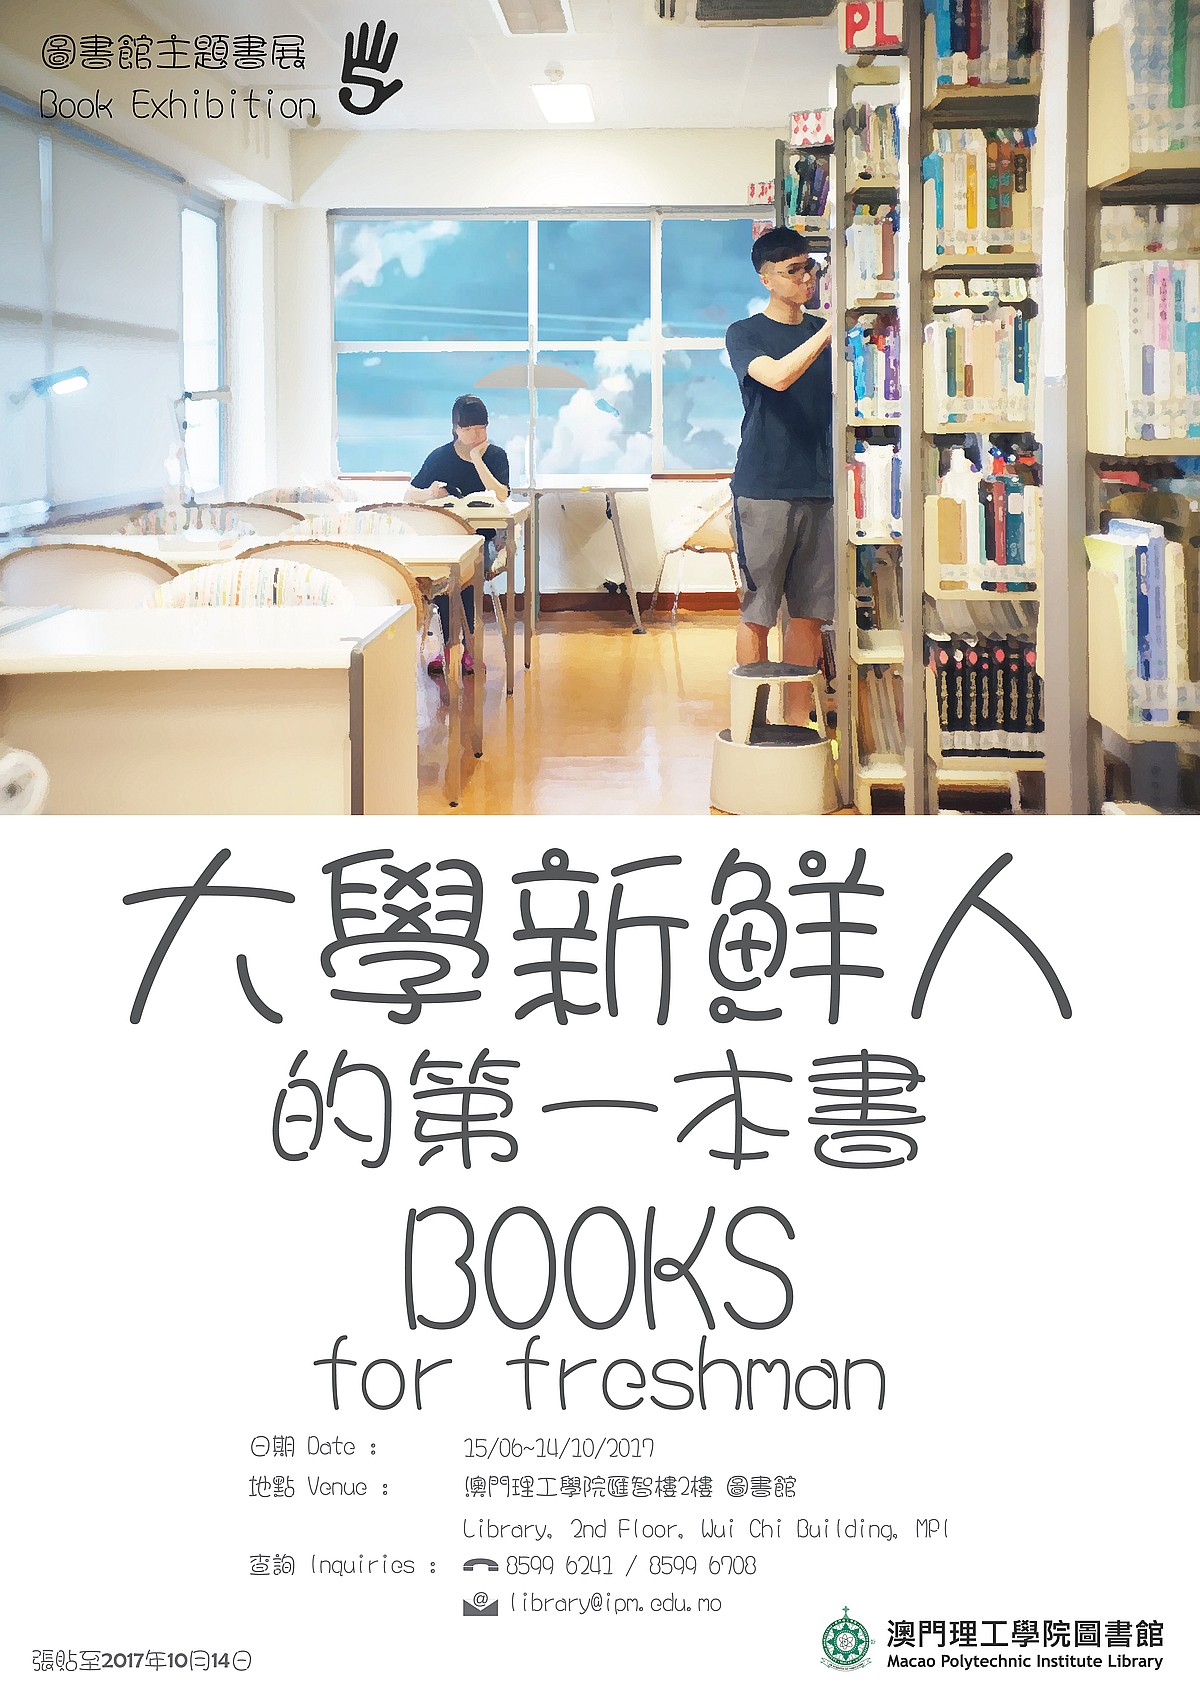 LIBRARY BOOK EXHIBITION 5 - Books for Freshman